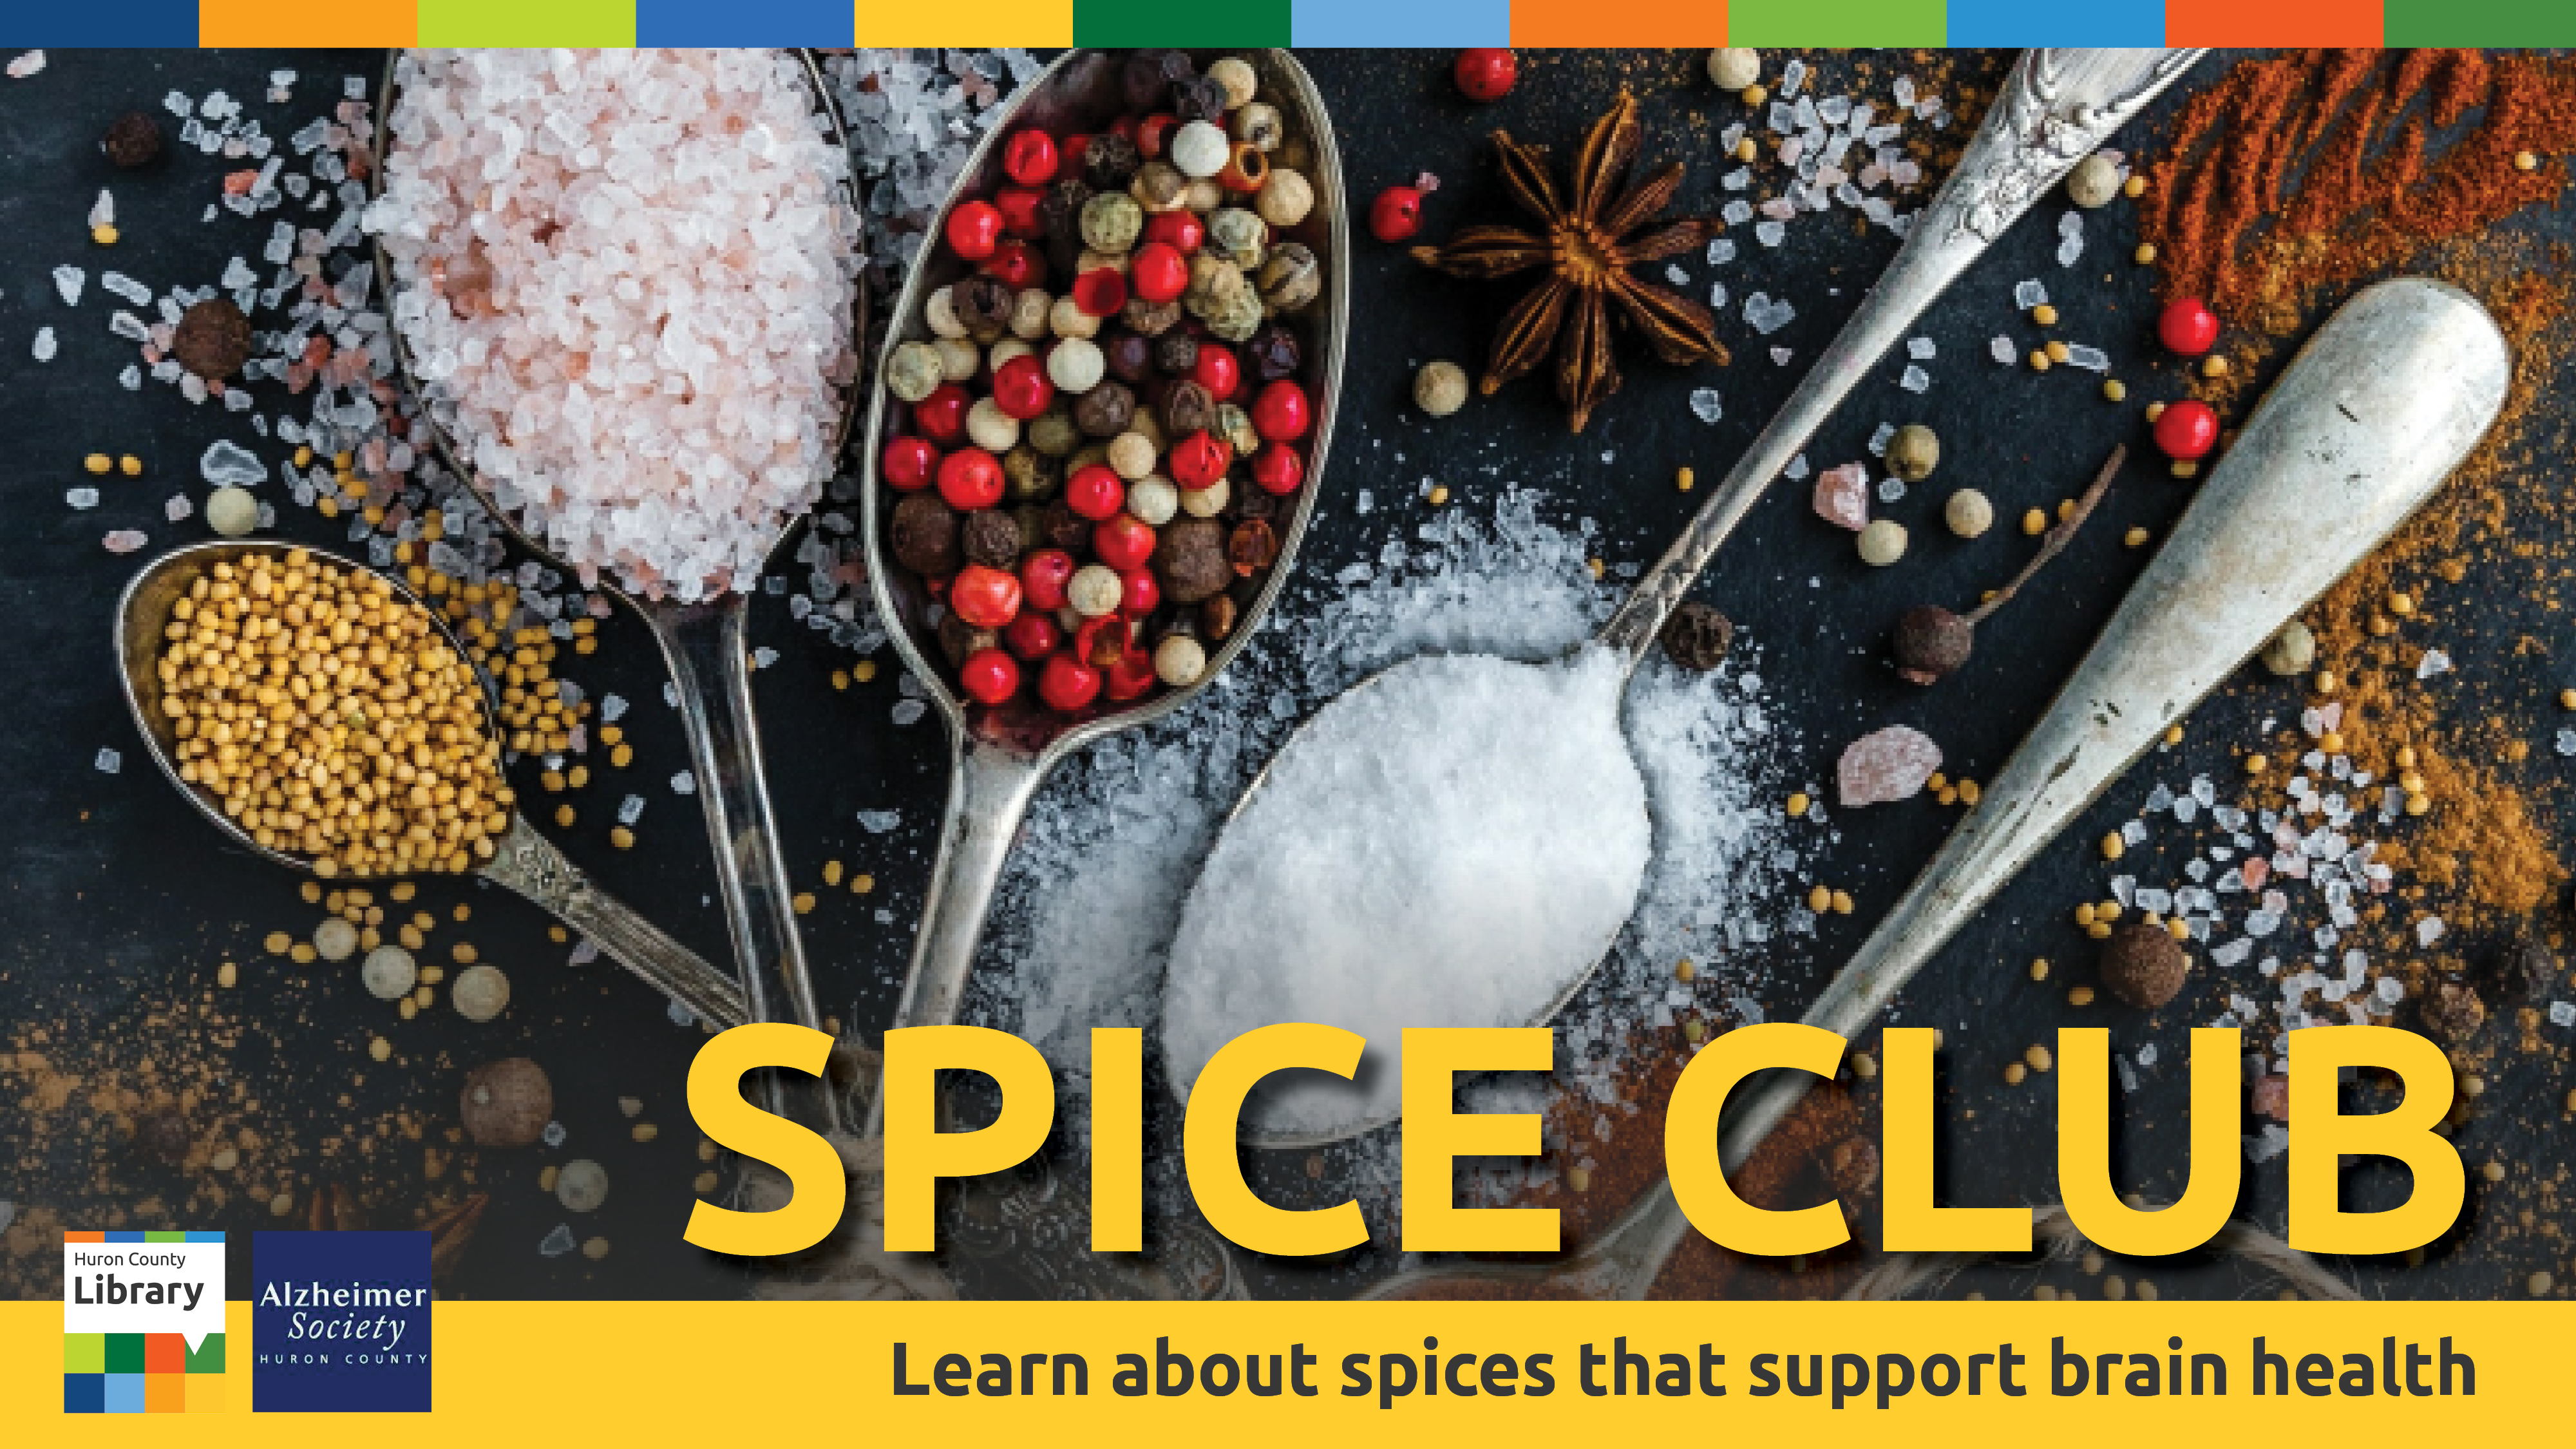 Image of spices with text promoting spice club for brain health